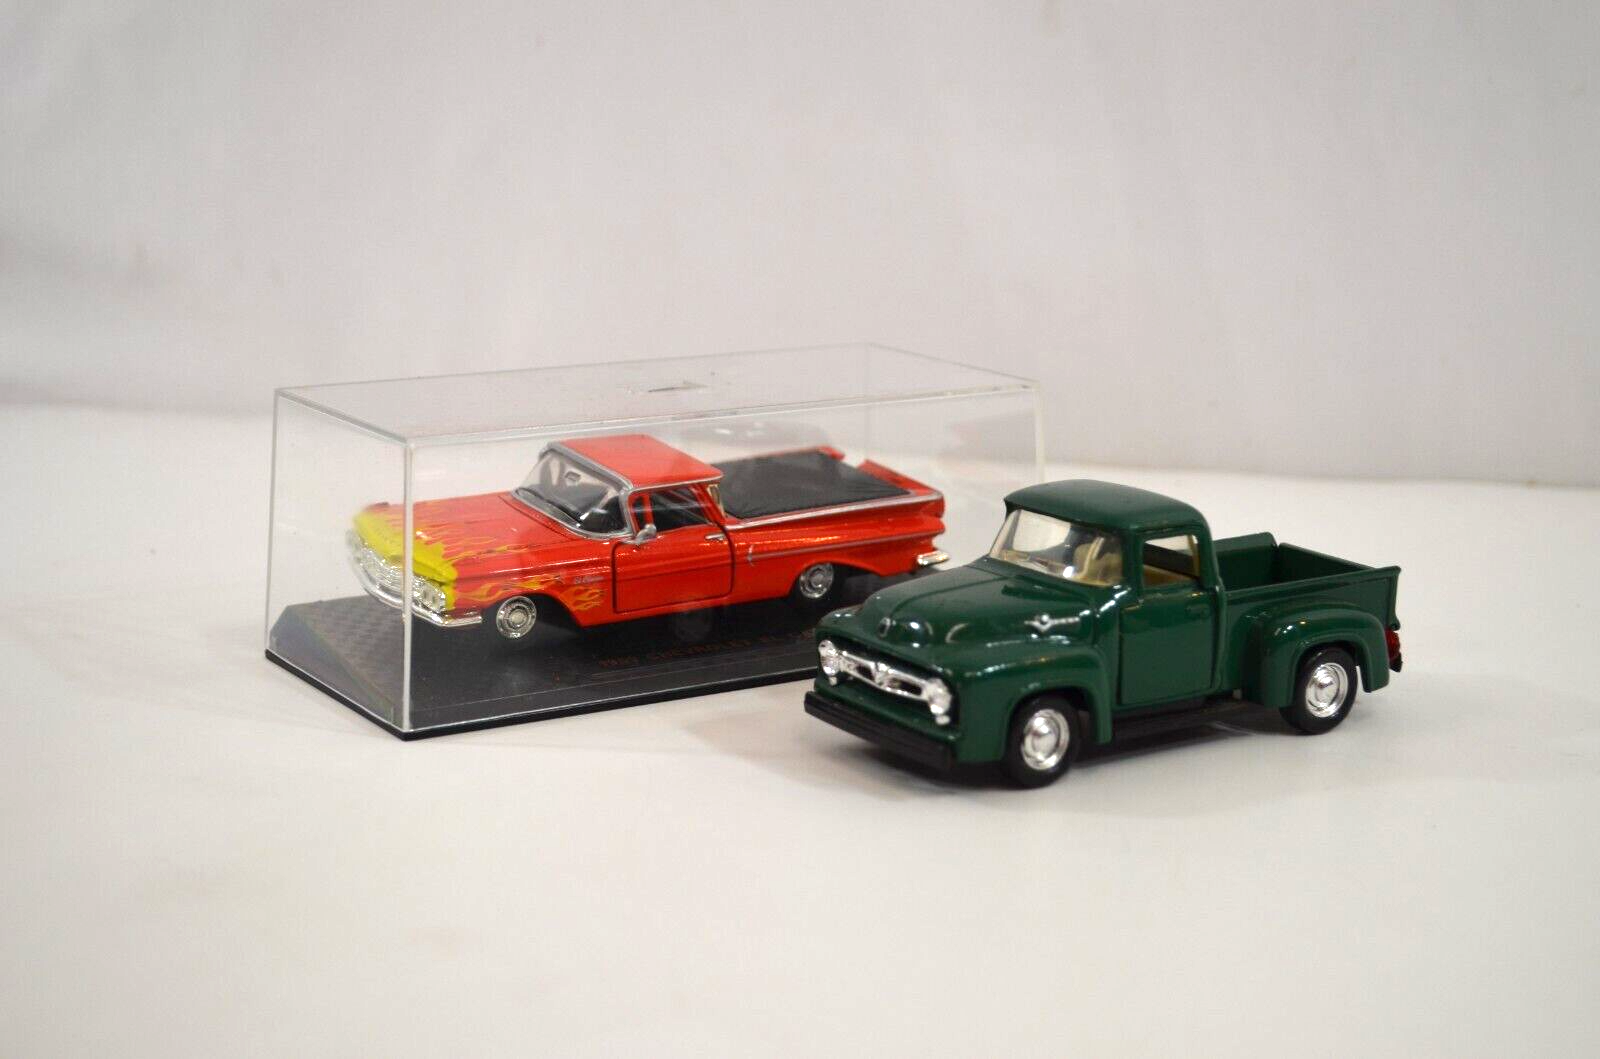 Road Champs 1/43 Diecast 1955 Ford F100 1959 Chevy El Camino Lot of 2 - $24.18